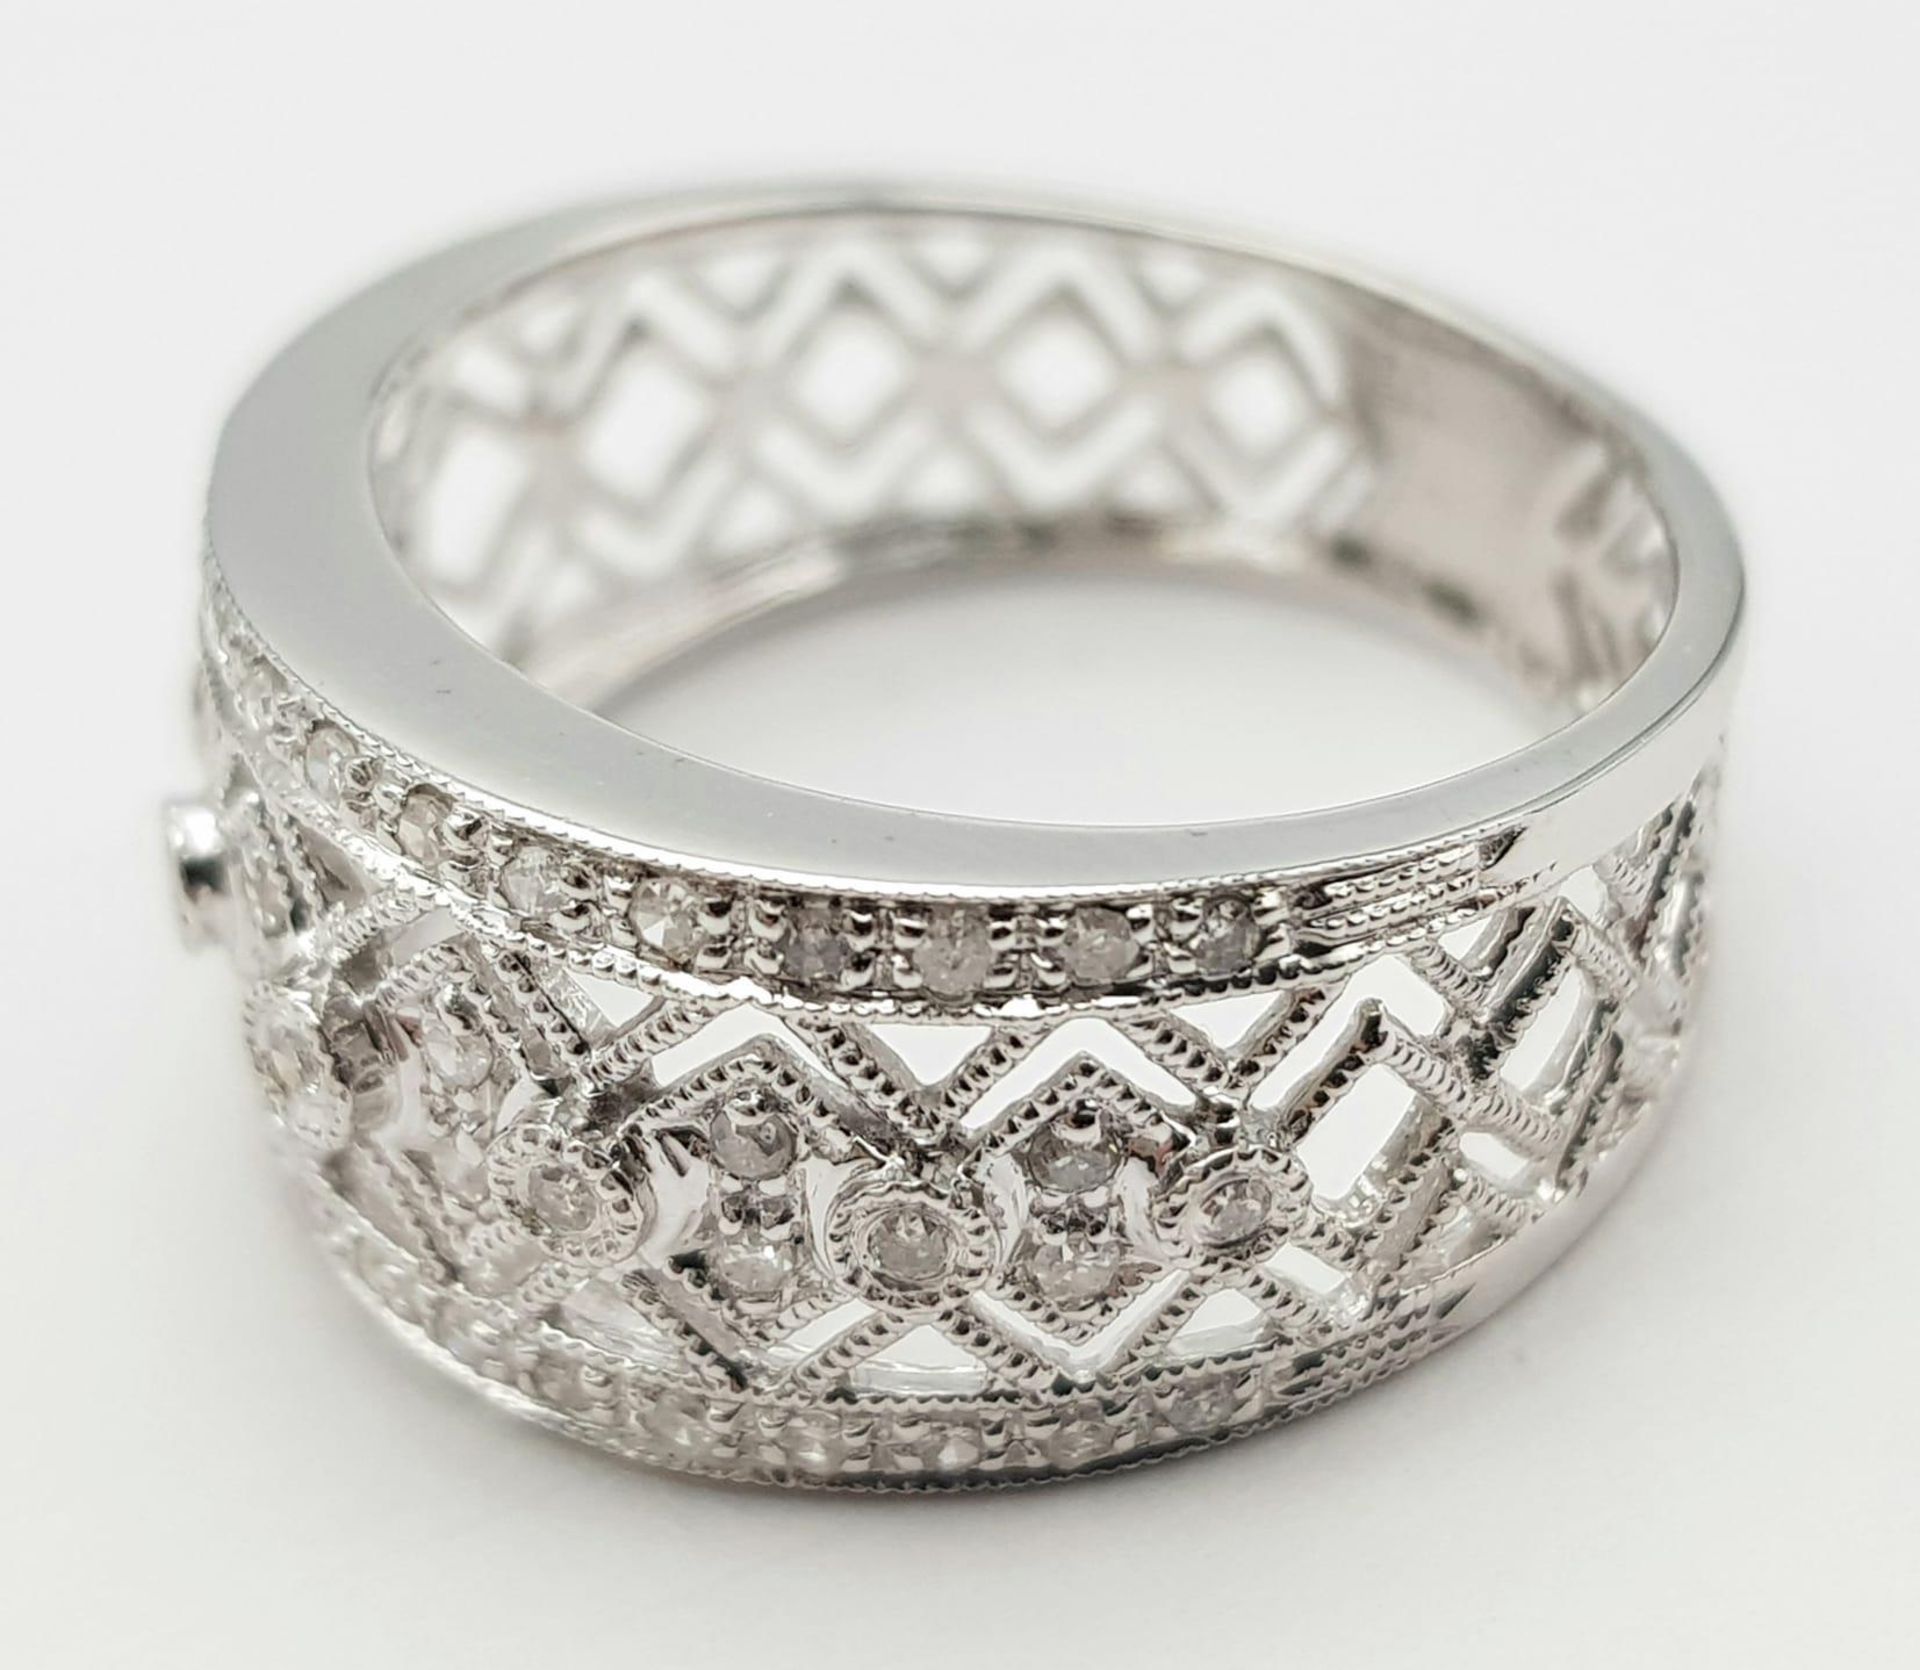 A 9K WHITE GOLD DIAMOND SET, WIDE OPEN-WORK DESIGN BAND RING. 3.3G. SIZE P. - Image 3 of 5